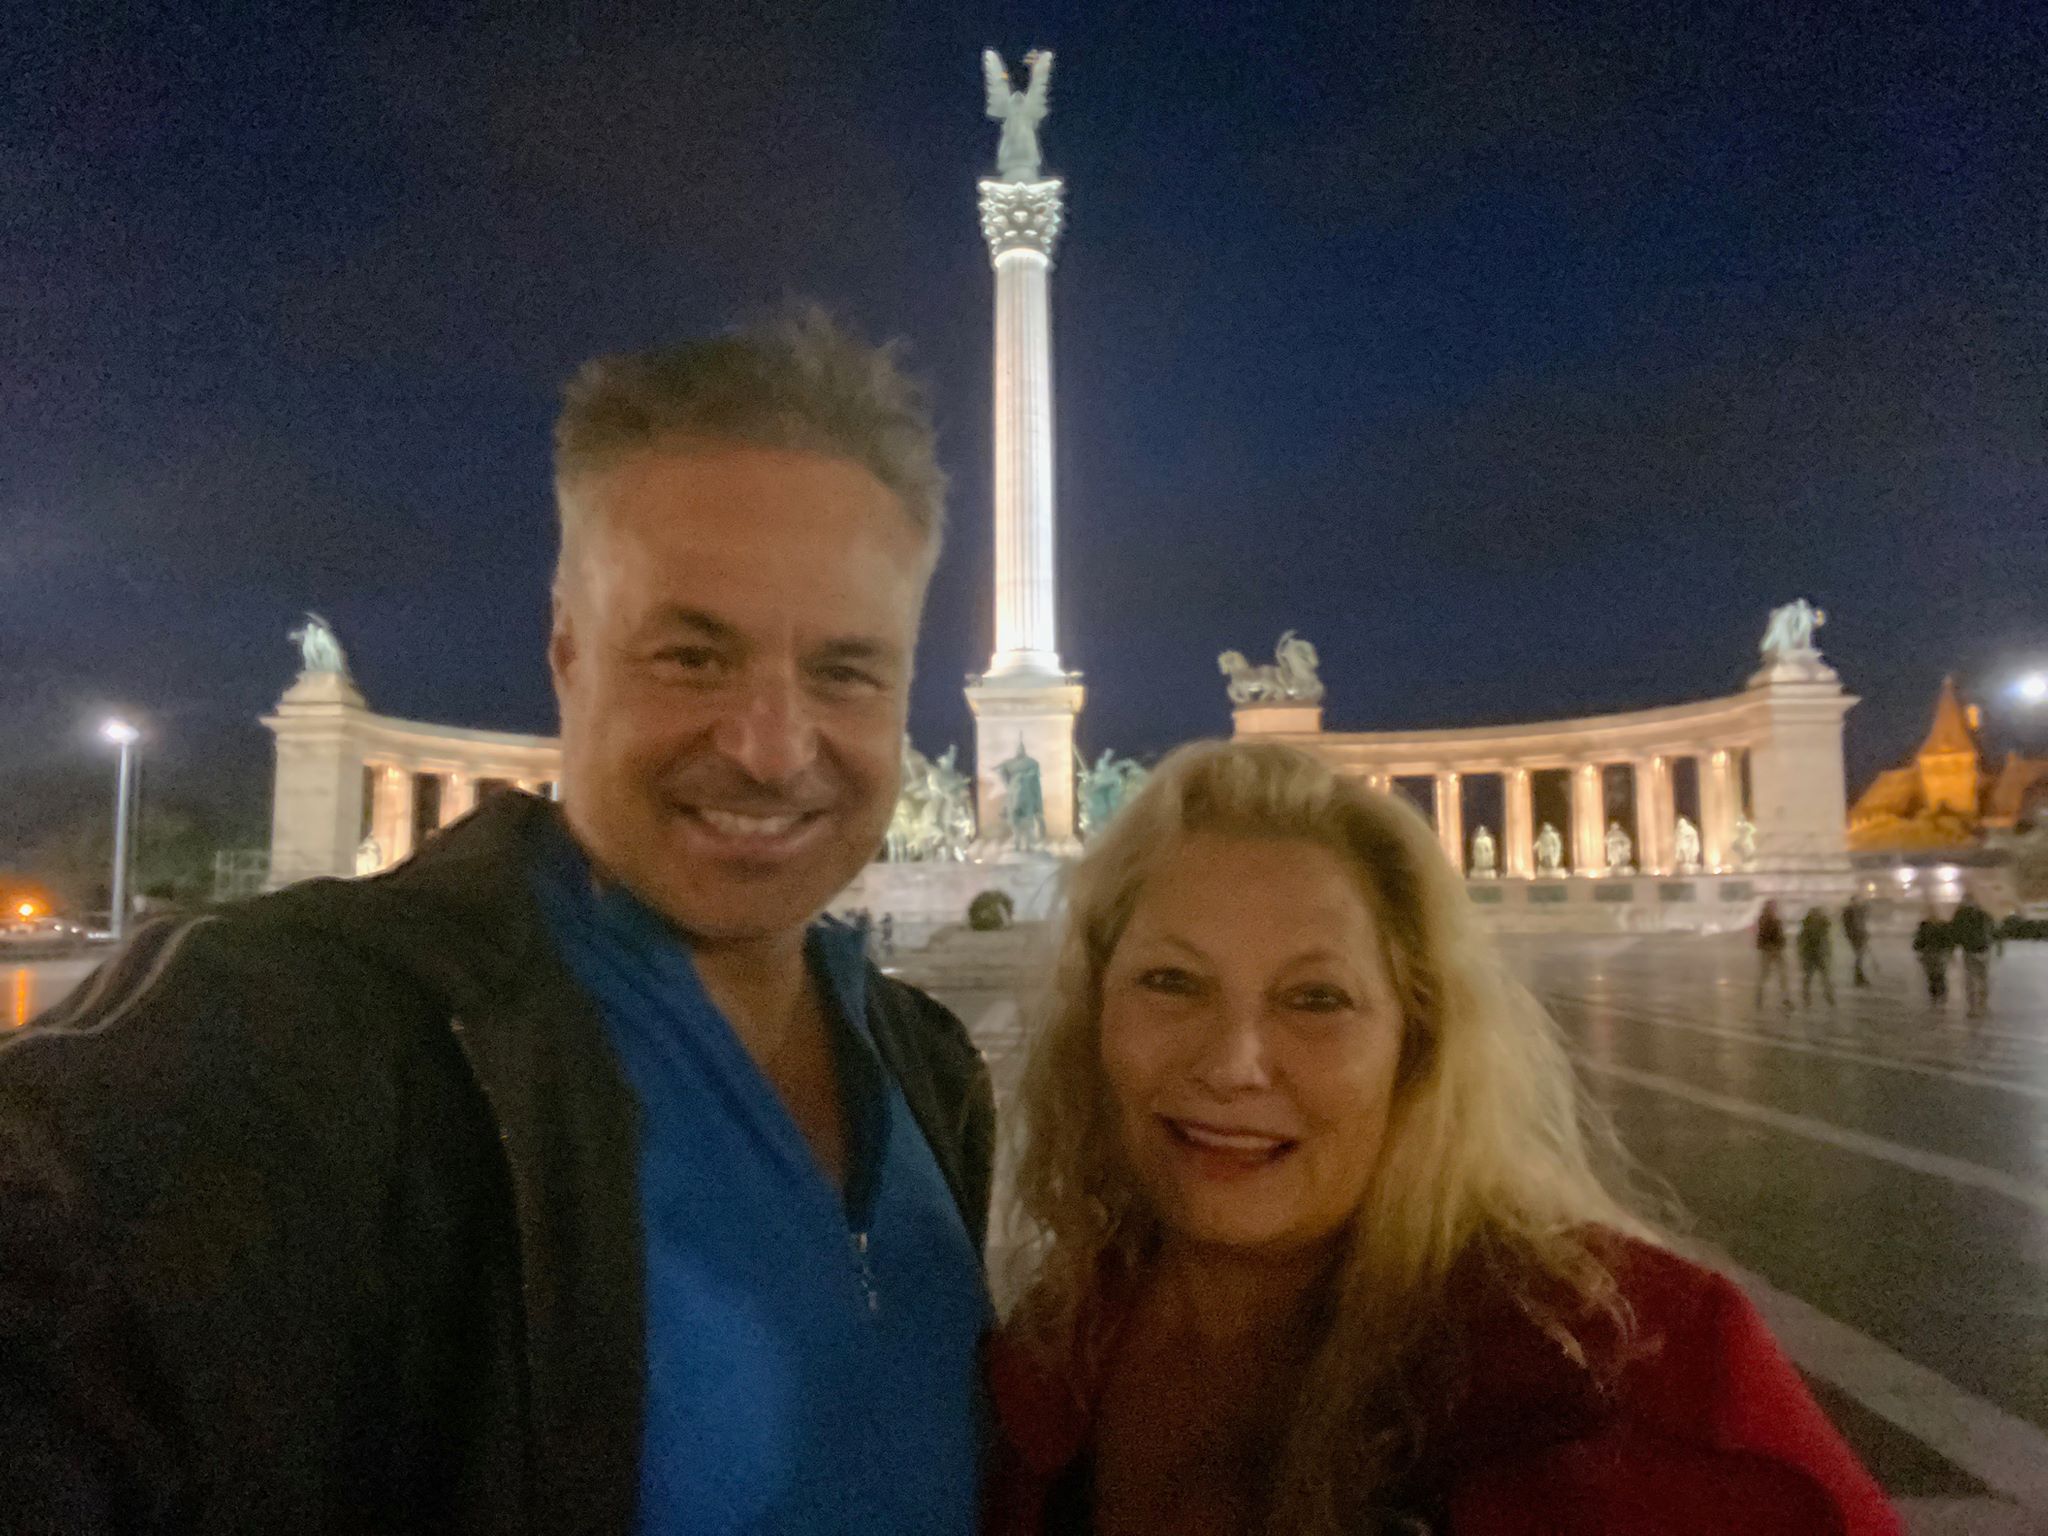 Clint Arthur & Ali Savitch in Heroes Square, Budapest, Hungary